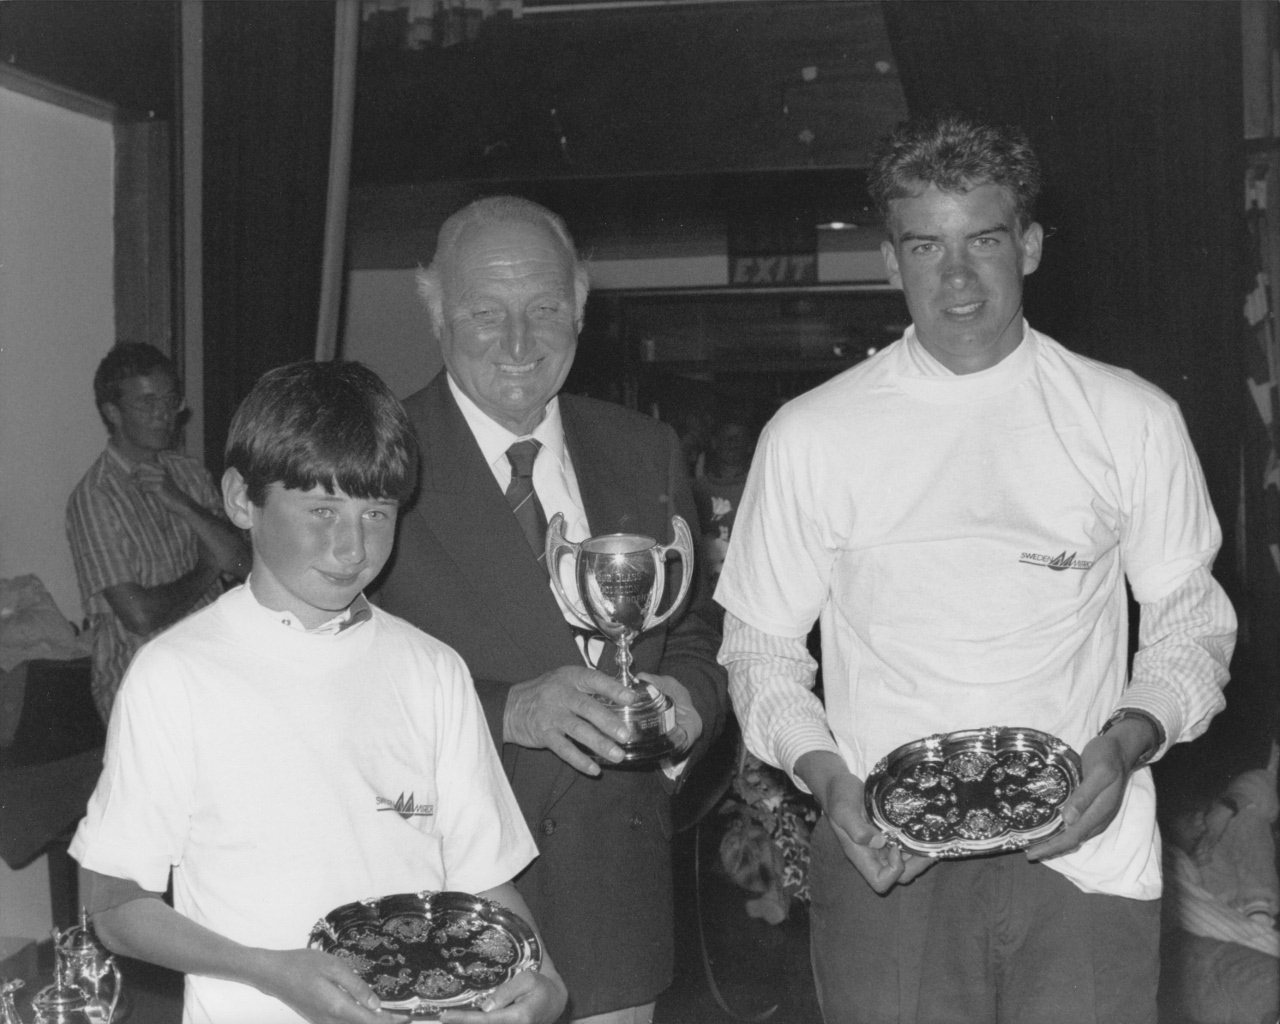 An older teenager and his young crew receiving their prizes and facing the camera